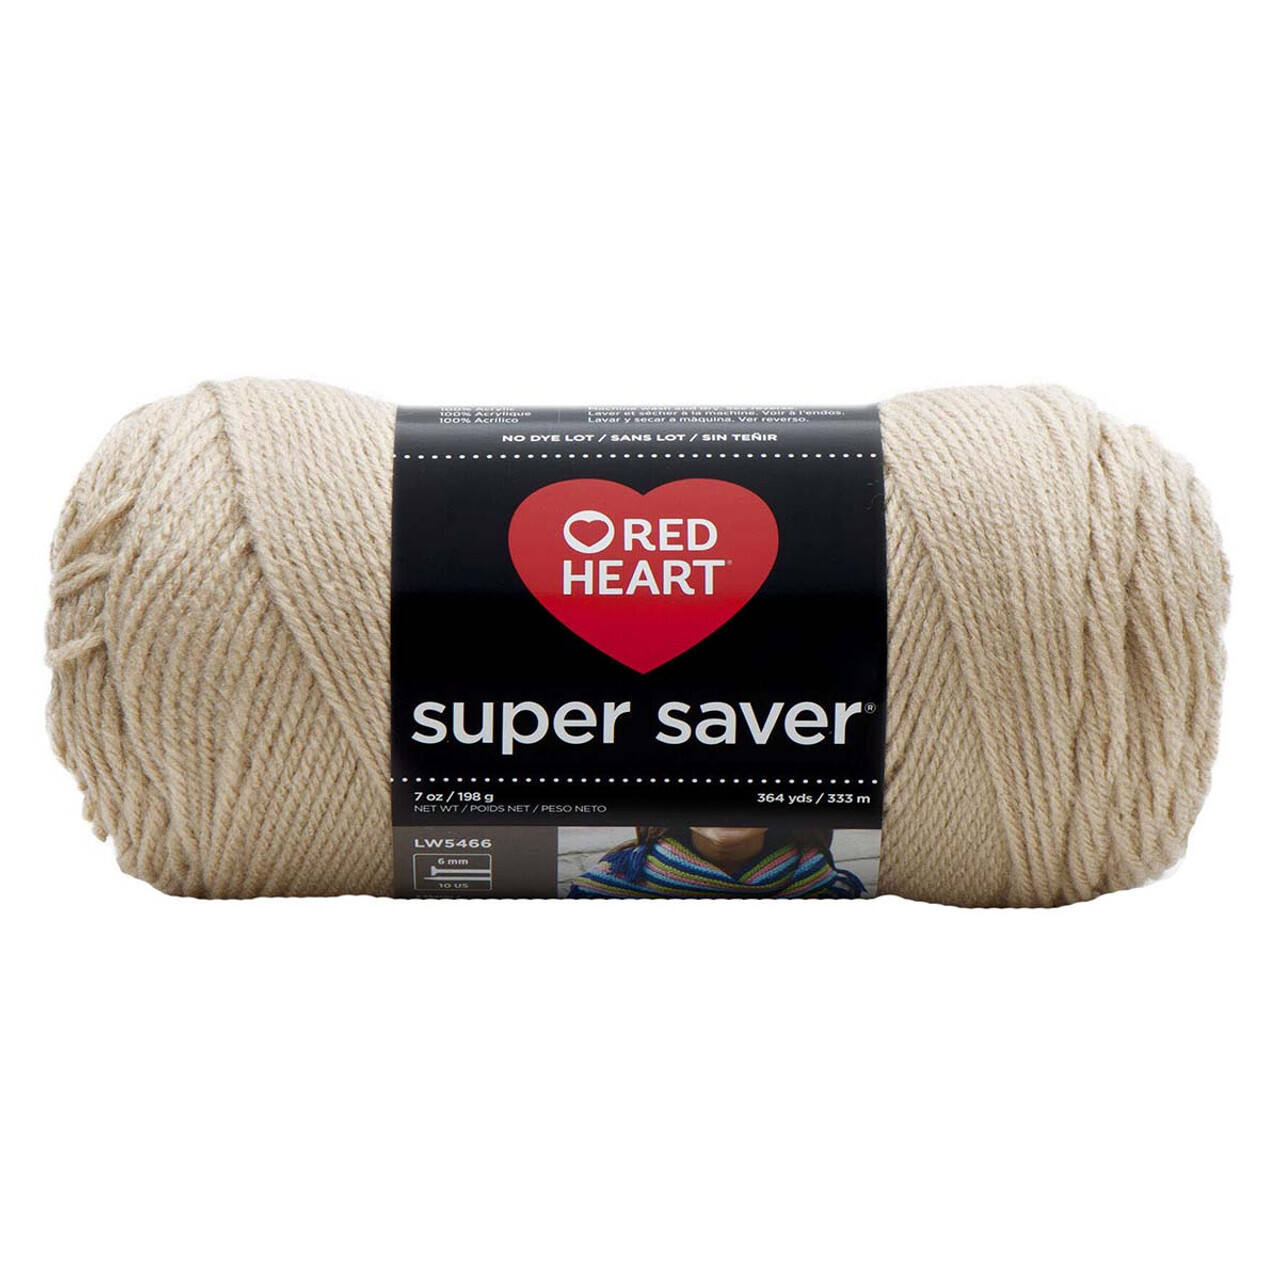 Red Heart super saver yarn lot of 3 , Color Artist Print